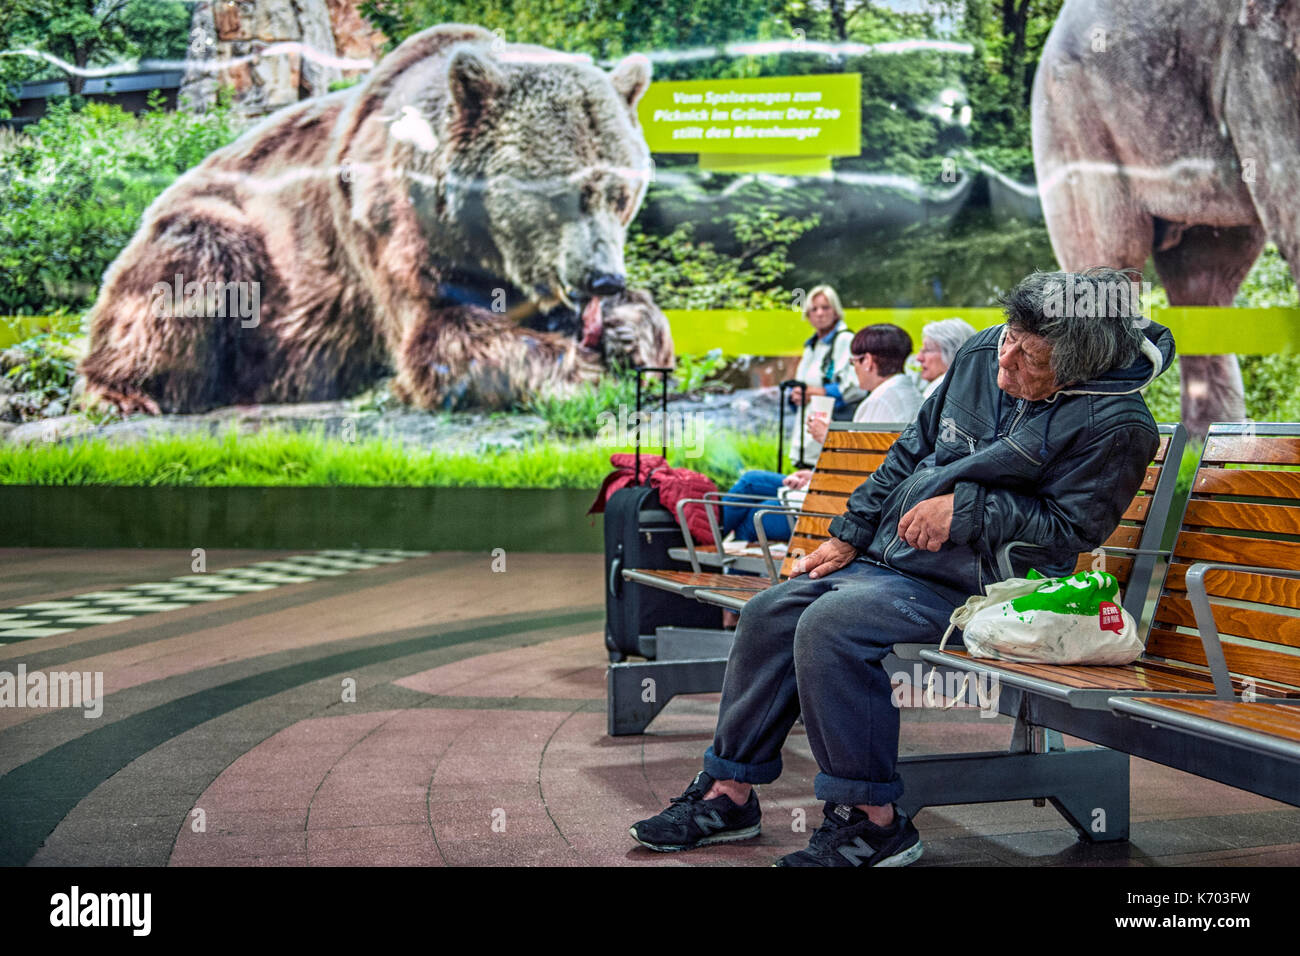 Germany An homeless drunk sitting on a bench of an hall of the Zoologischer Garten metro station, Berlin Stock Photo